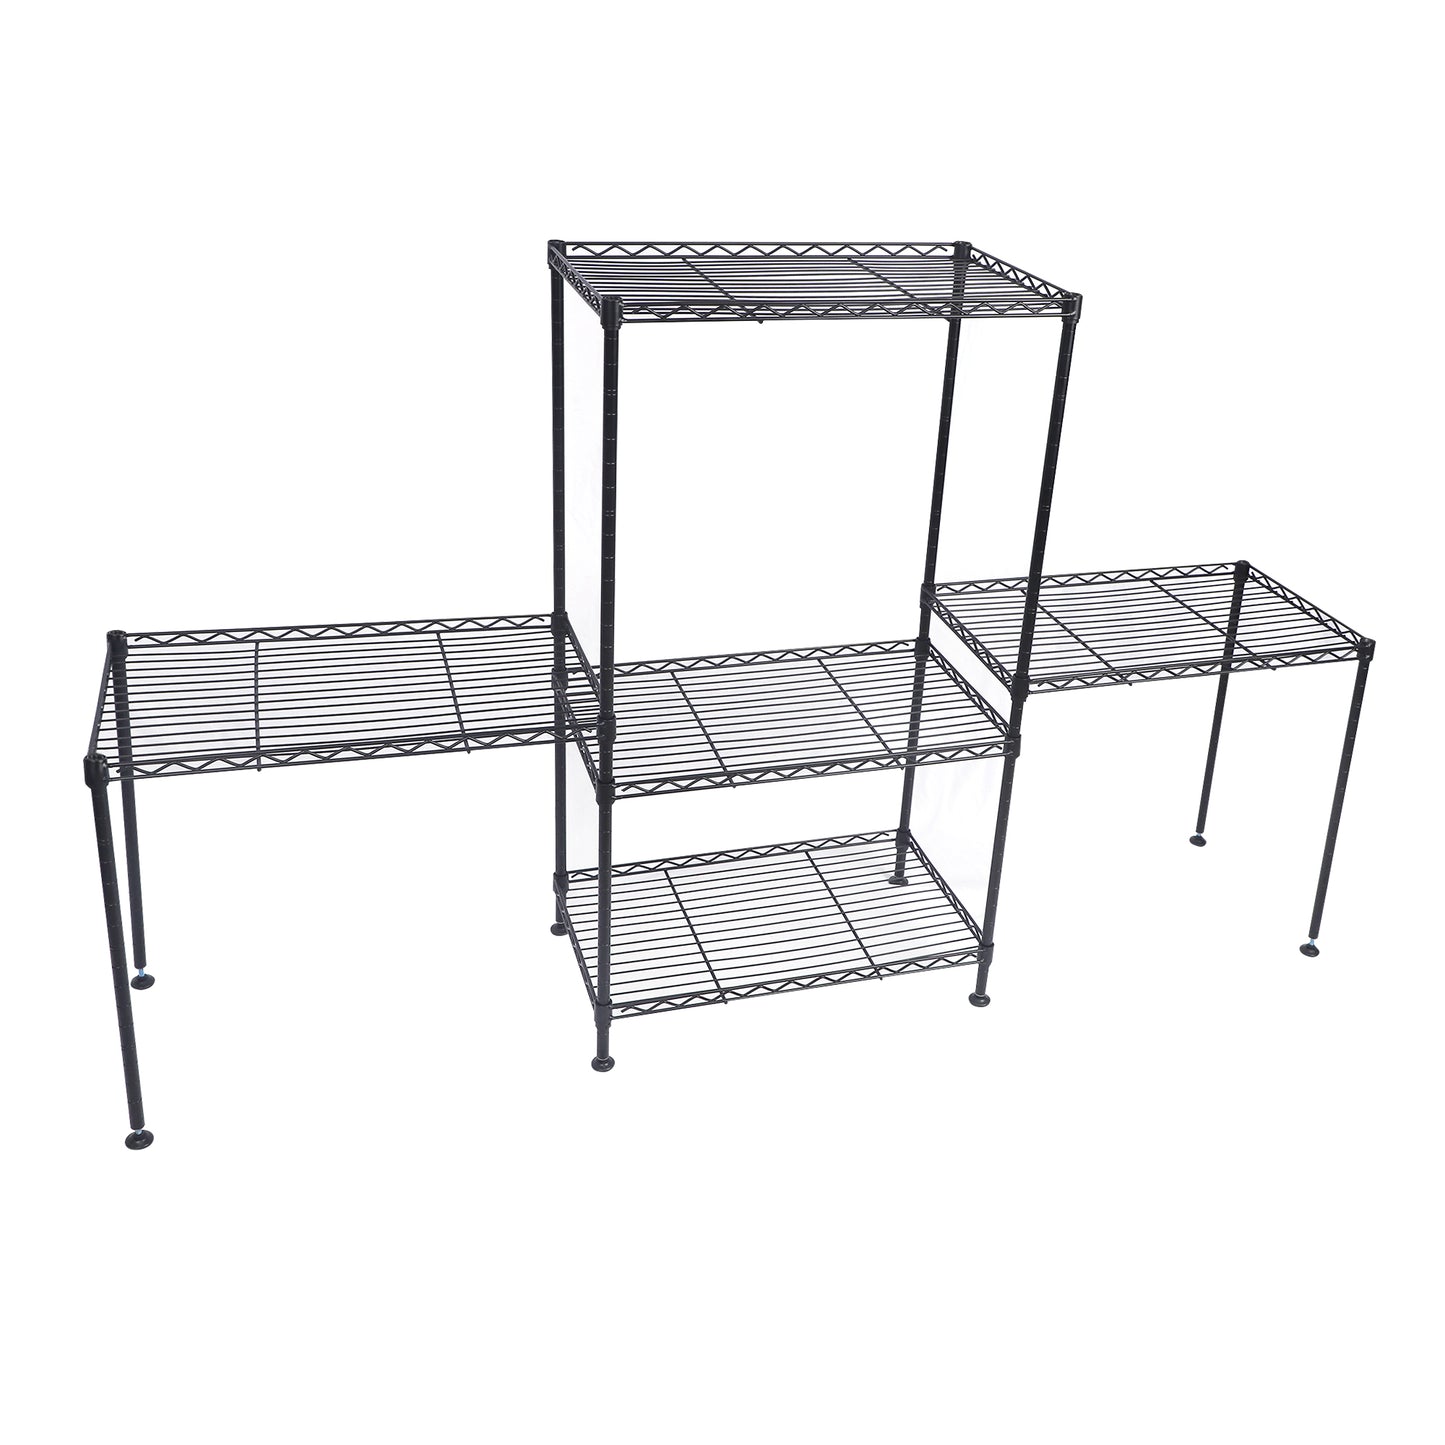 5 Tier Adjustable Storage Shelves Metal Storage Rack Wire Shelving Unit Storage Shelves Metal 19.68"Lx11.81"Wx53.54"H Changeable Assembly Floor Standing Rack for Pantry Closet Kitchen Laundry, Black